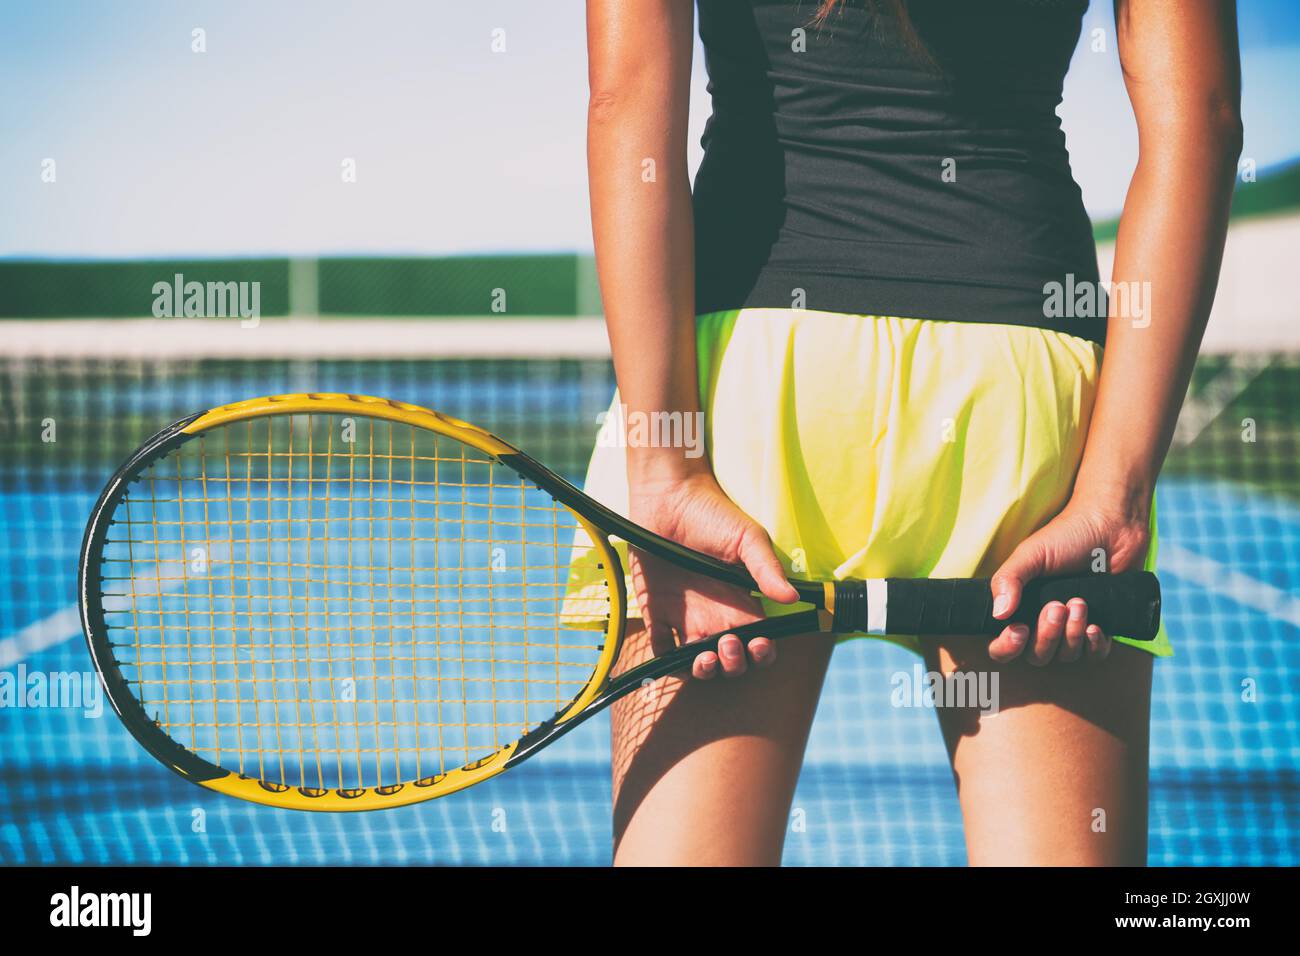 Back view of tennis player athlete woman holding racket against fashion skirt and back of thighs ready to play game on hard court playing match Stock Photo